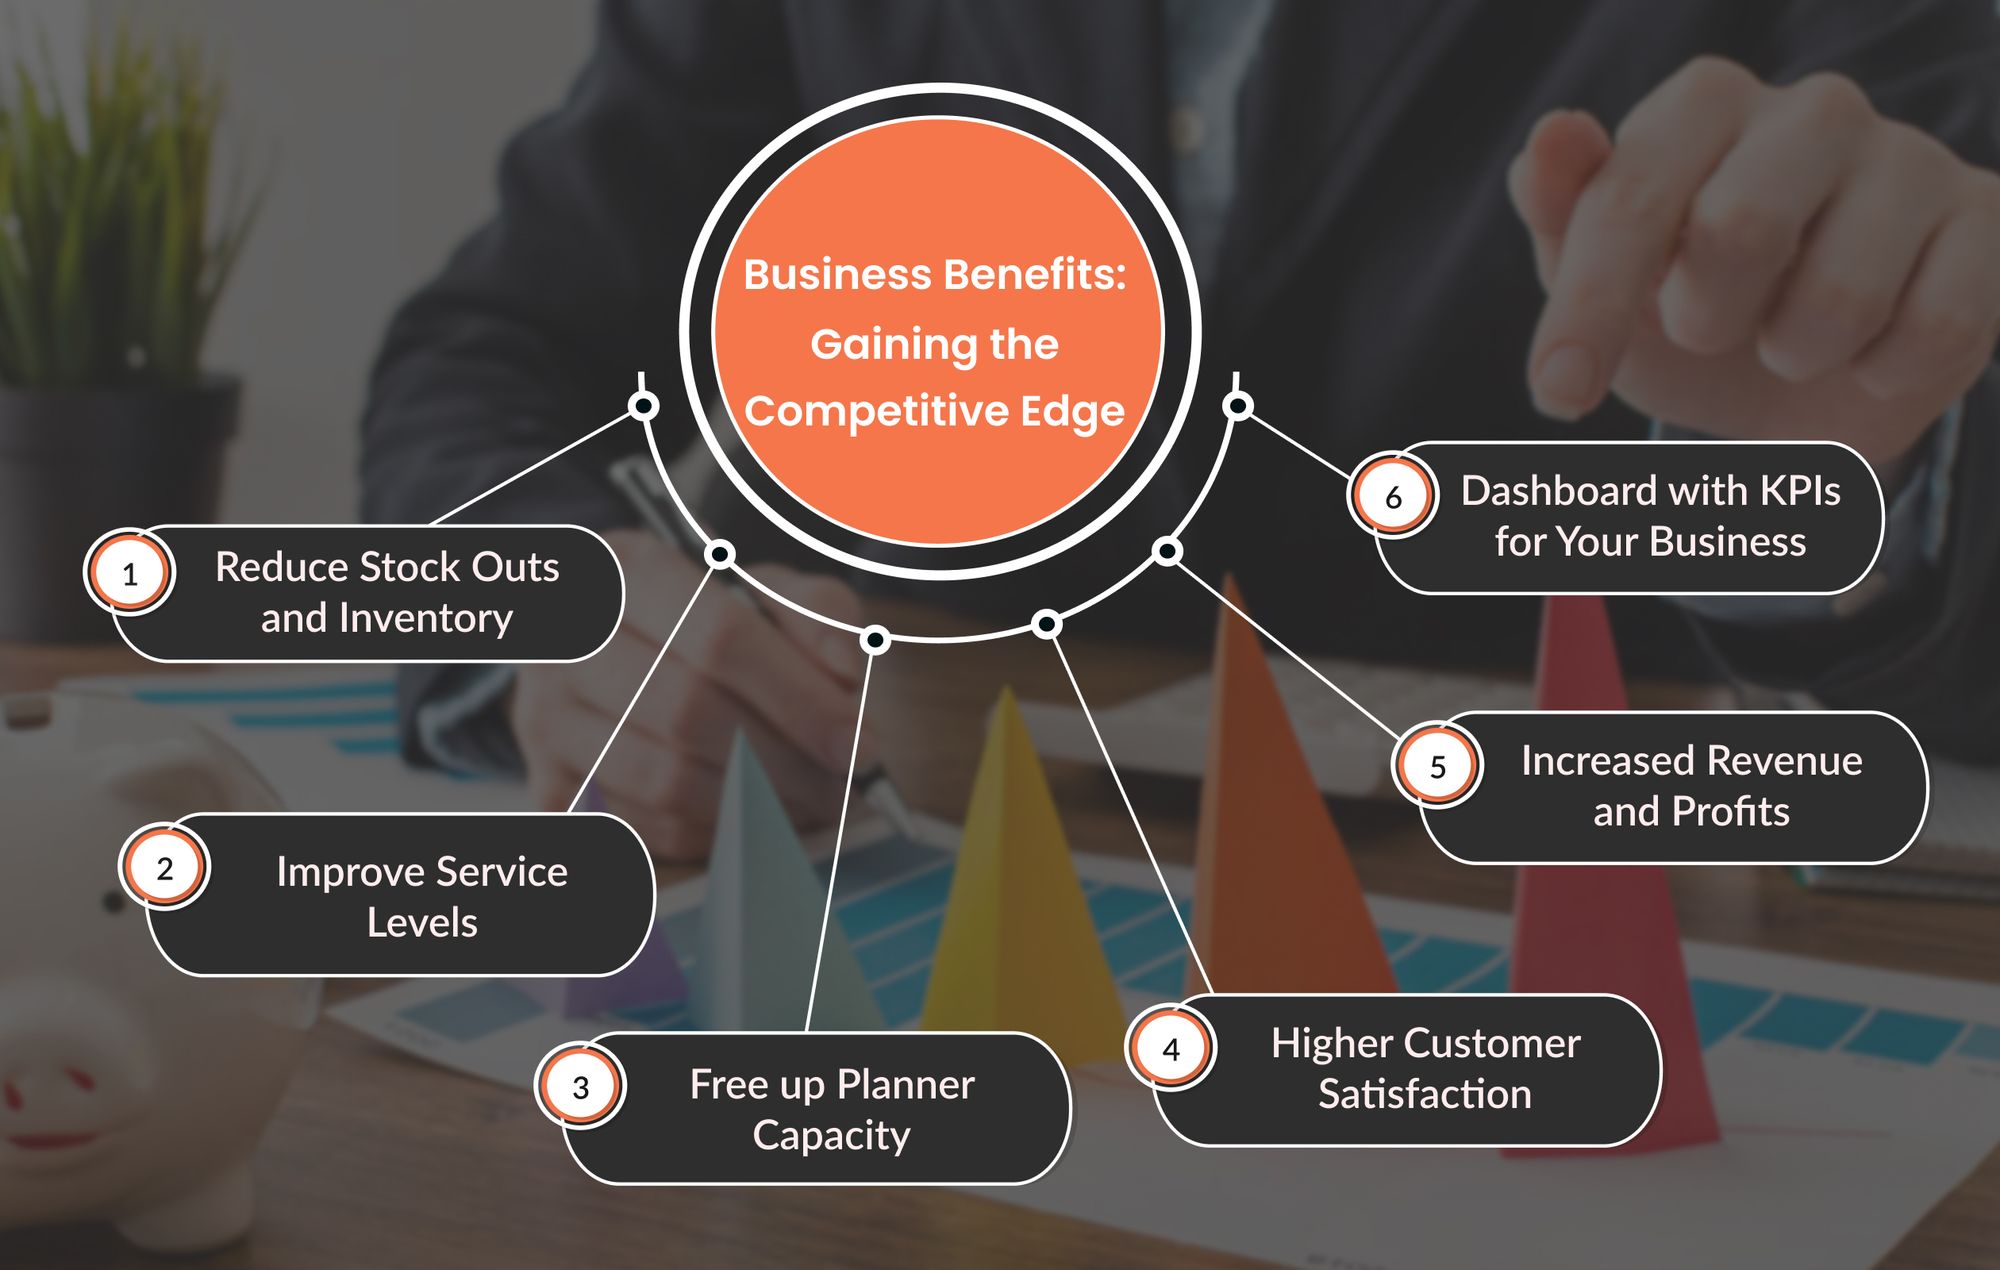 Business Benefits: Gaining the Competitive Edge